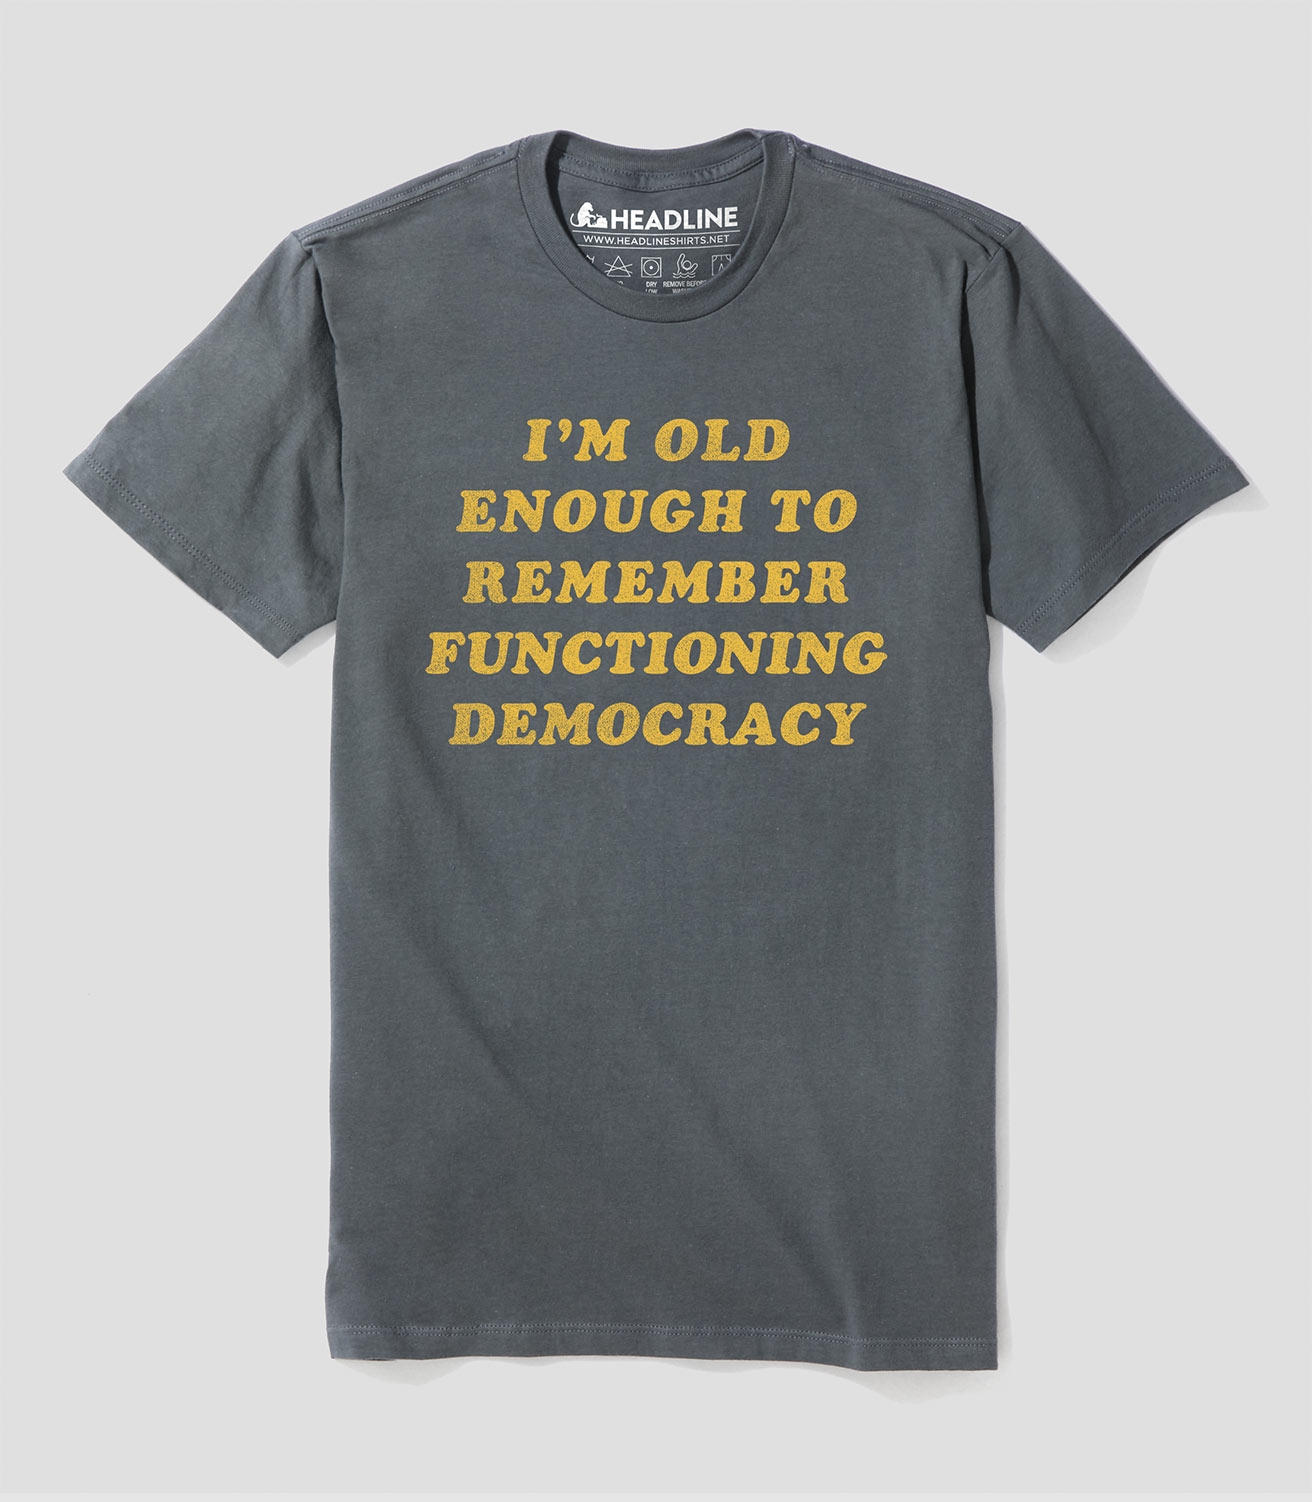 I'm Old Enough To Remember Functioning Democracy Unisex 100% Cotton T-Shirt